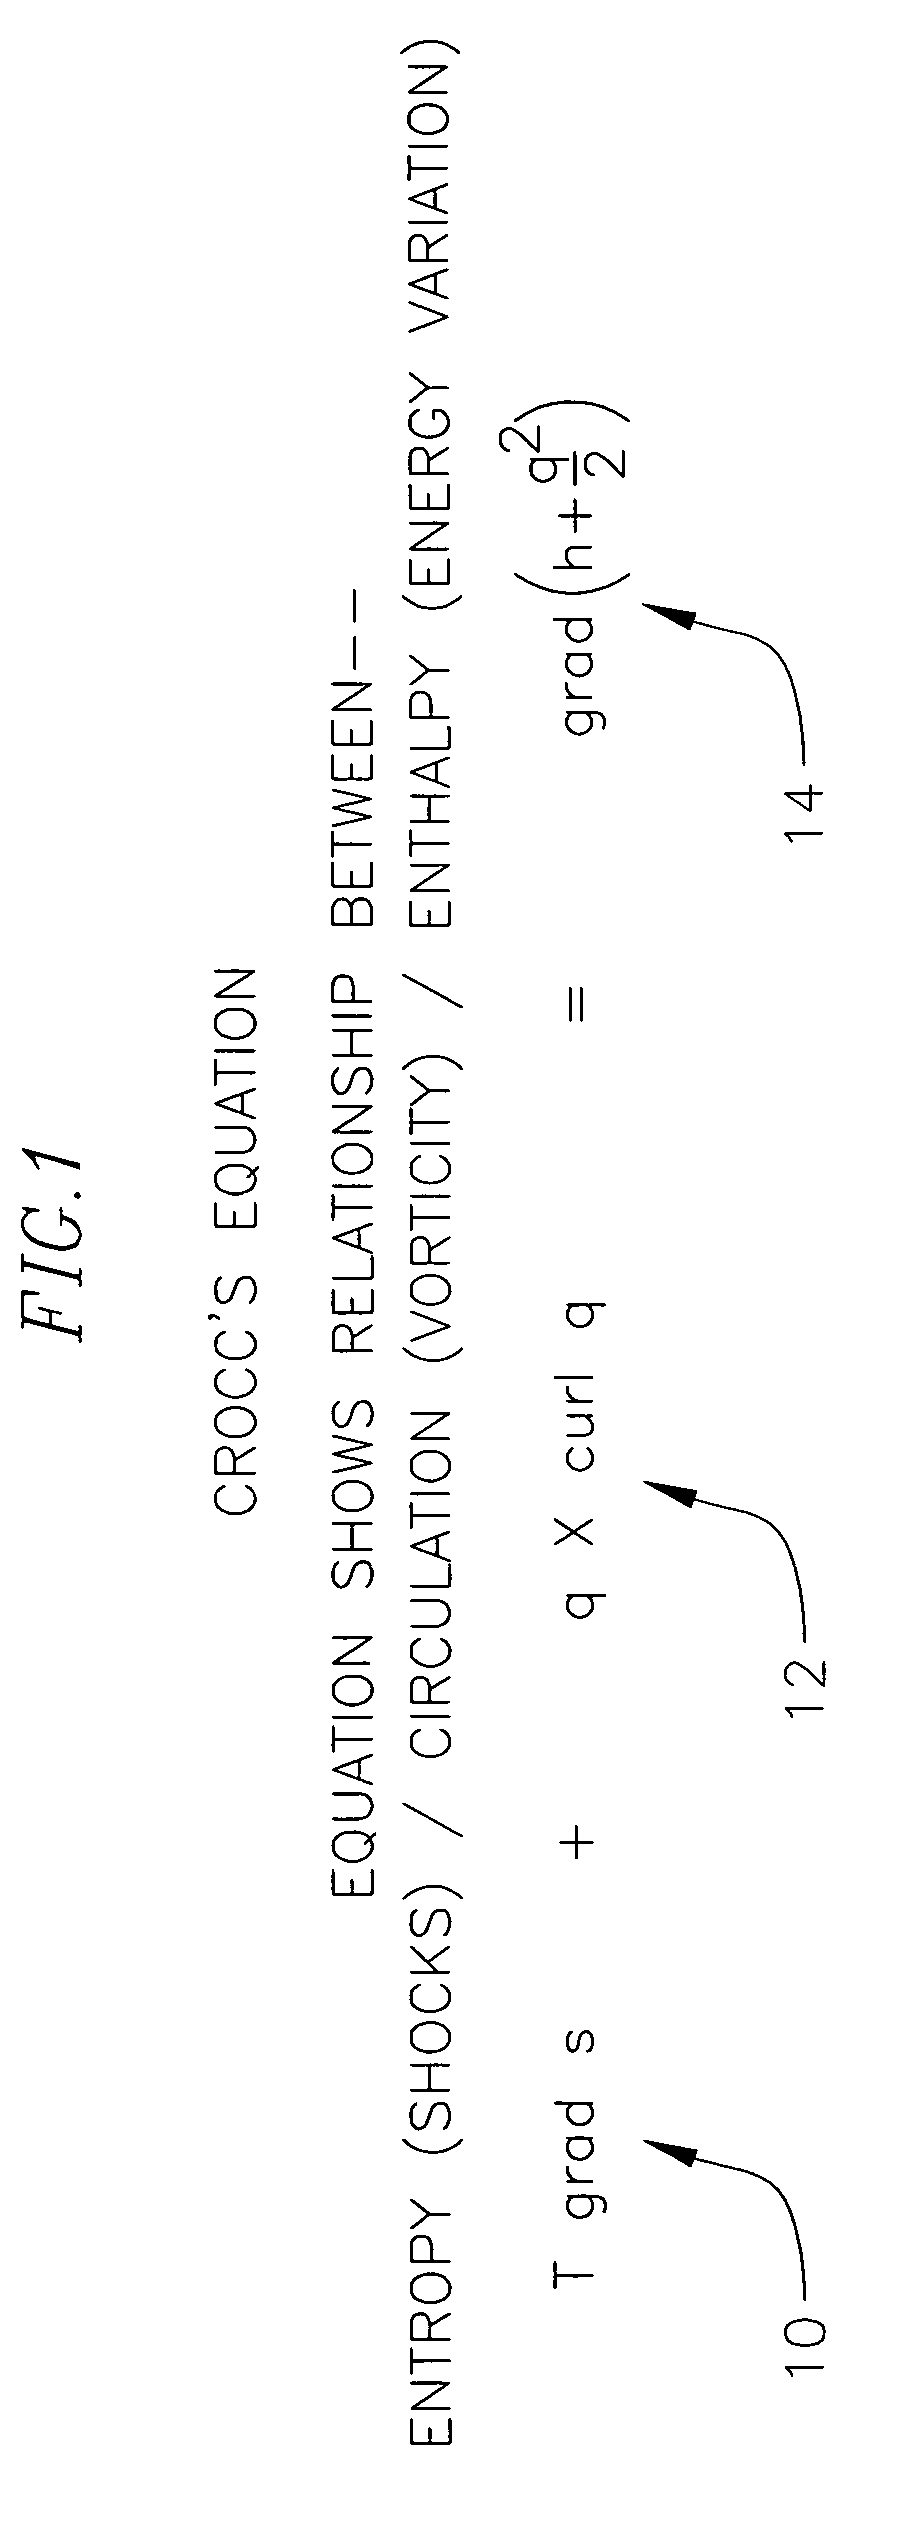 Supersonic aircraft footprint spreading control system and method